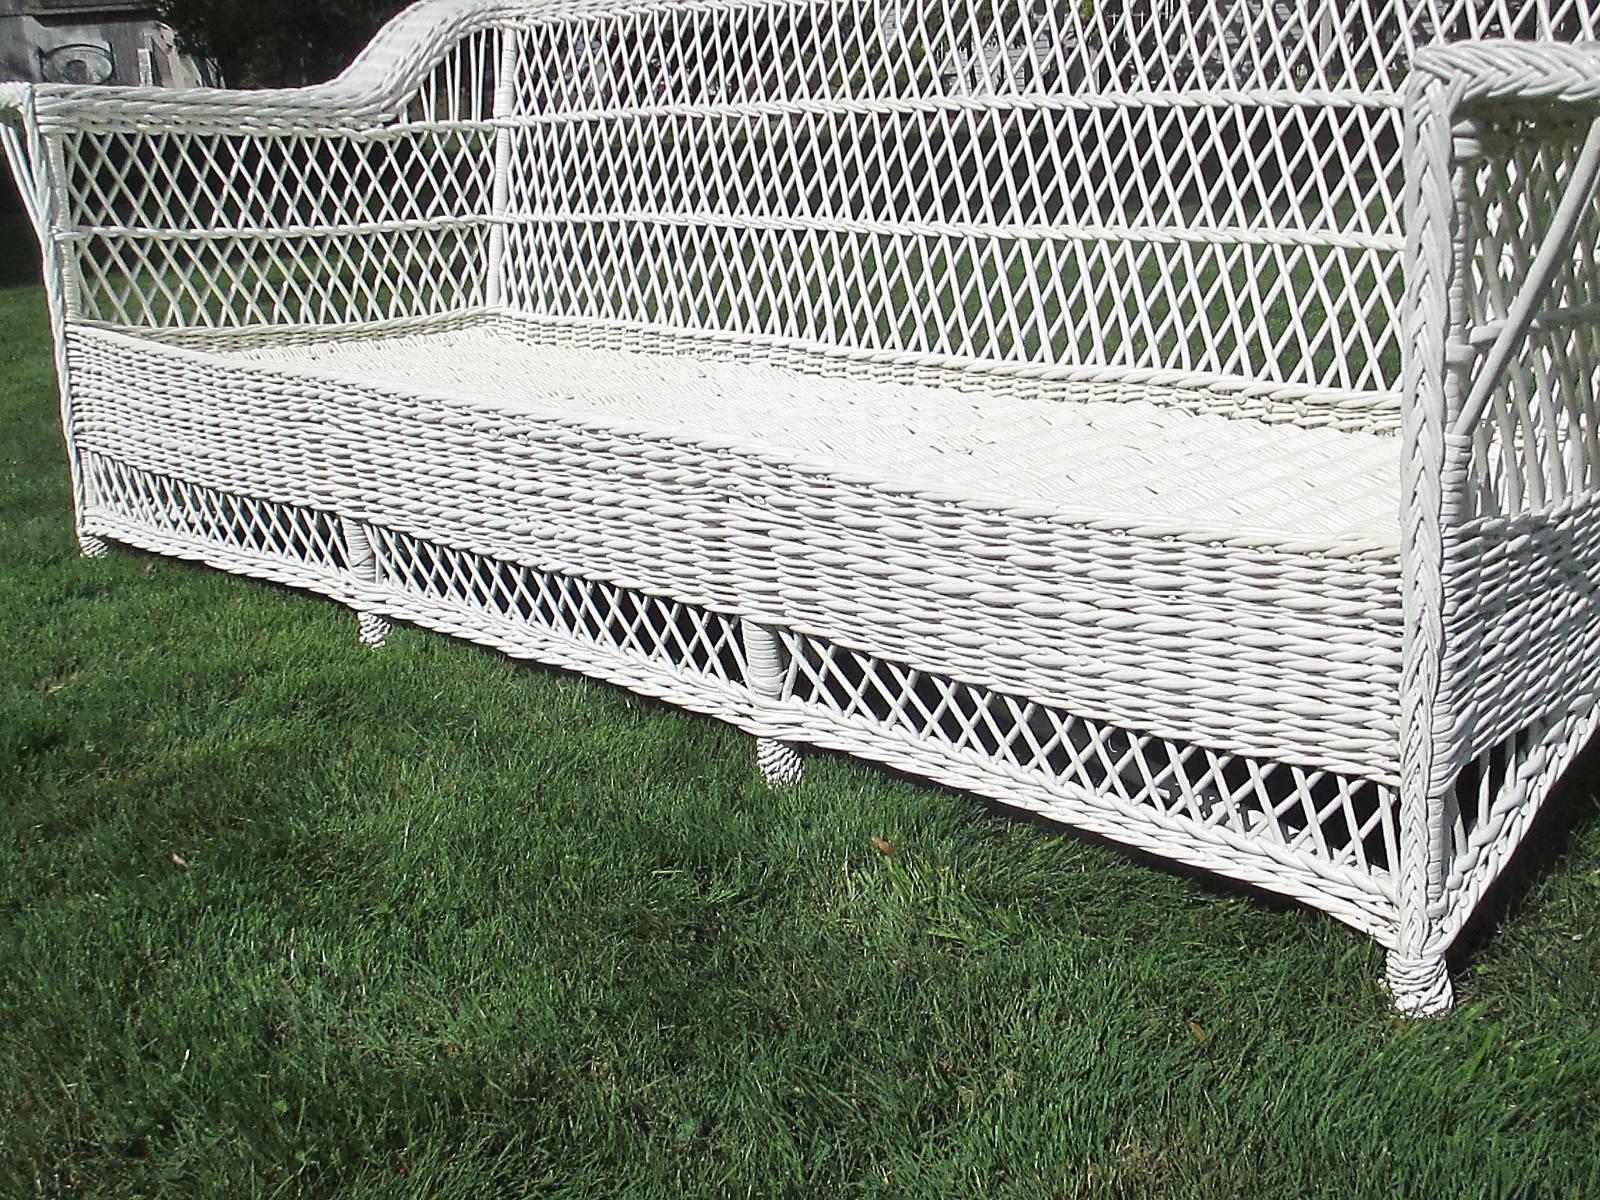 Bar Harbor Wicker Sofa In Excellent Condition For Sale In Sheffield, MA